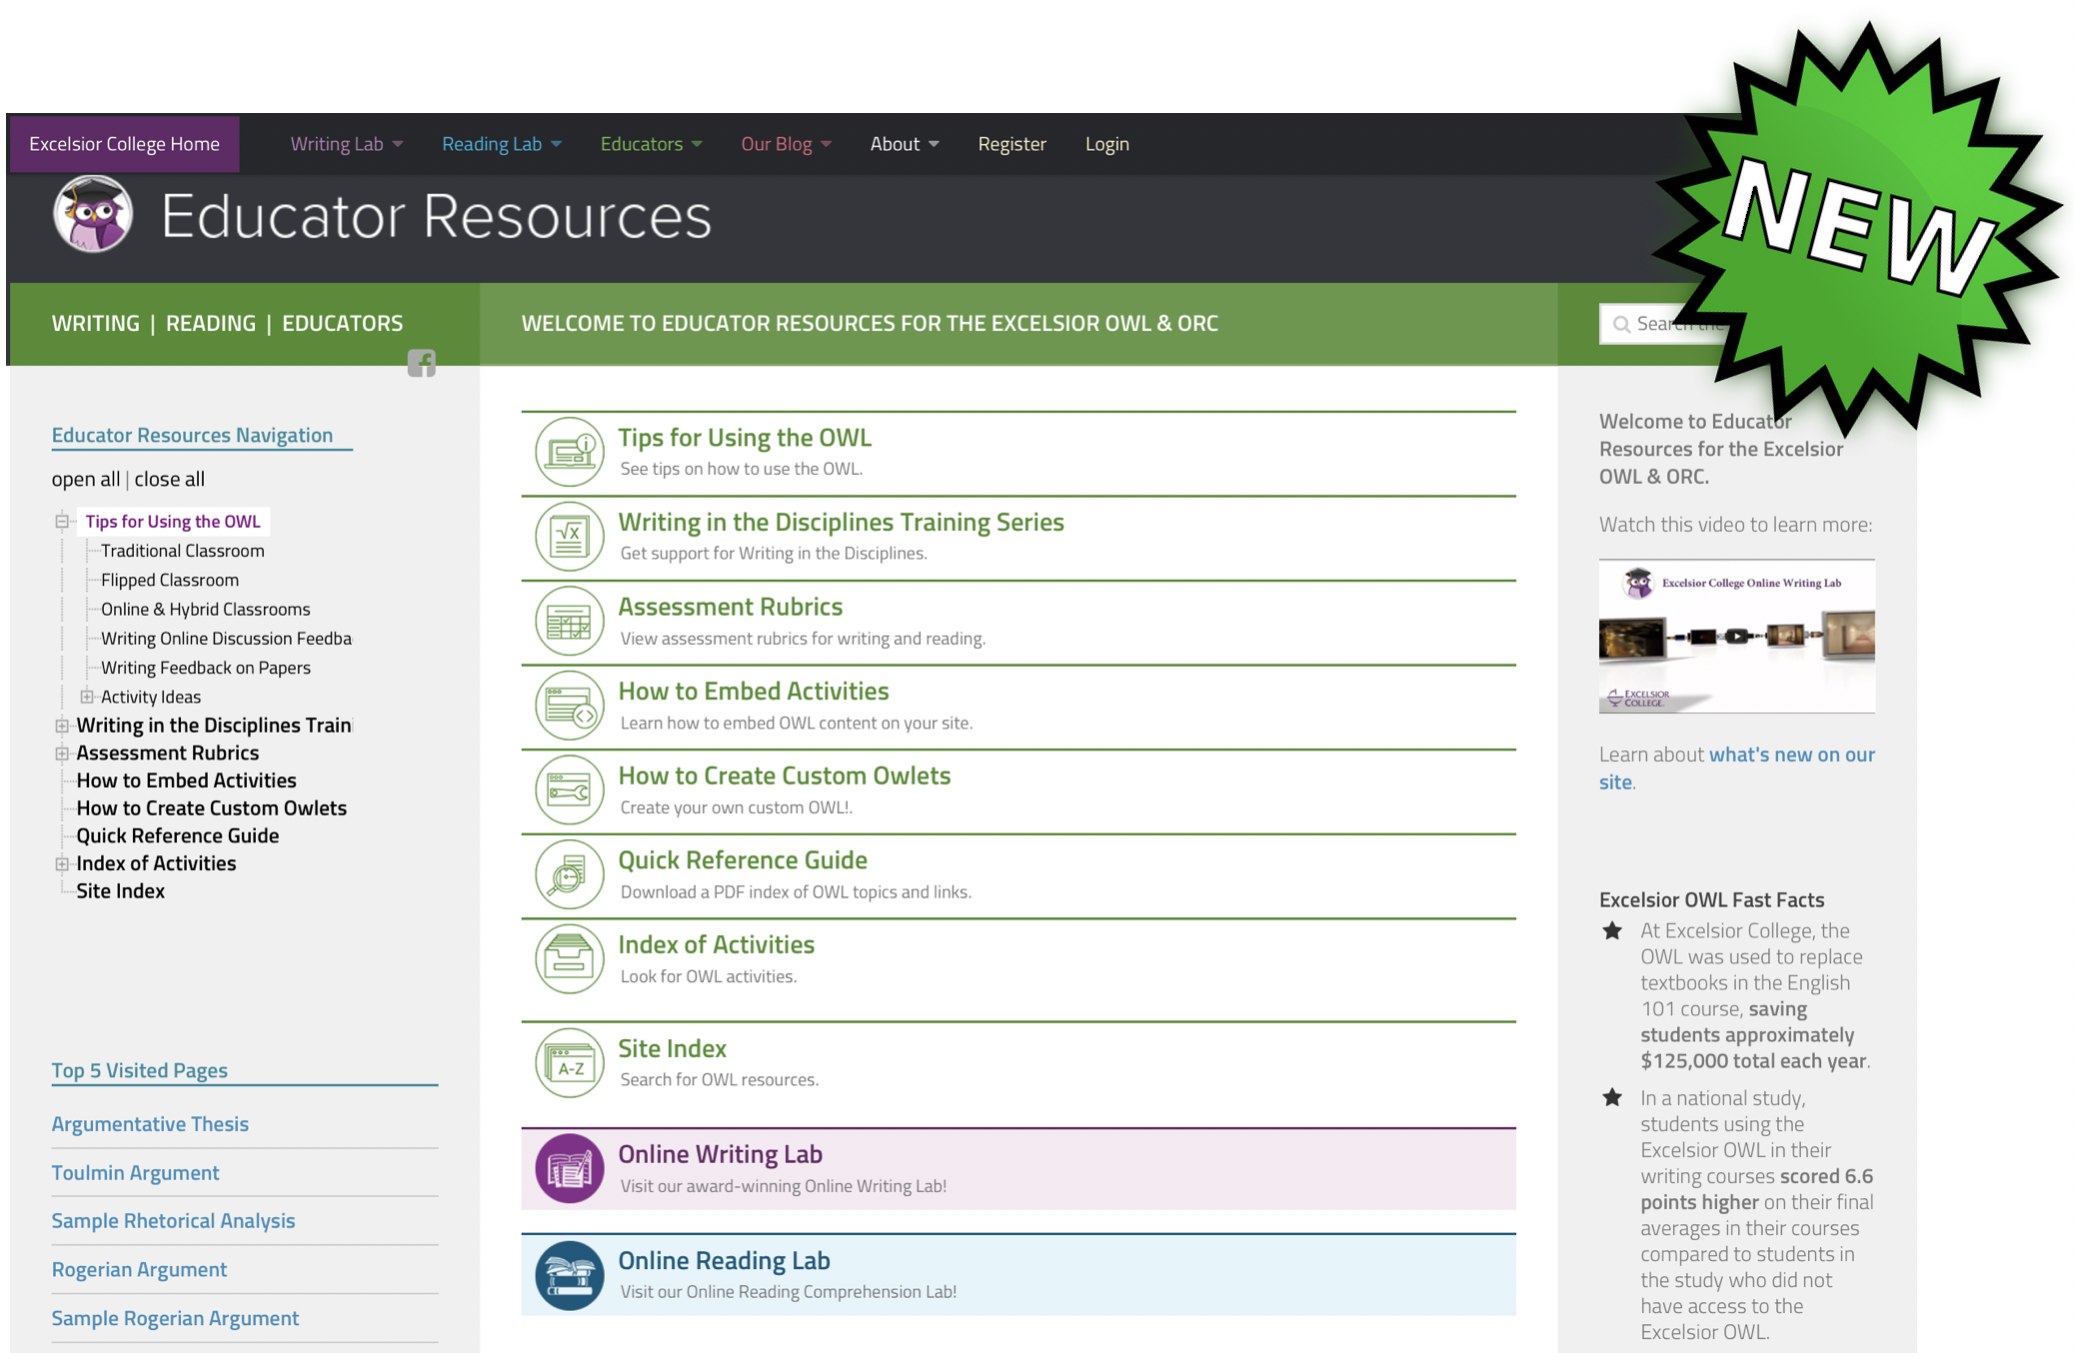 New Educator Resources Home Page